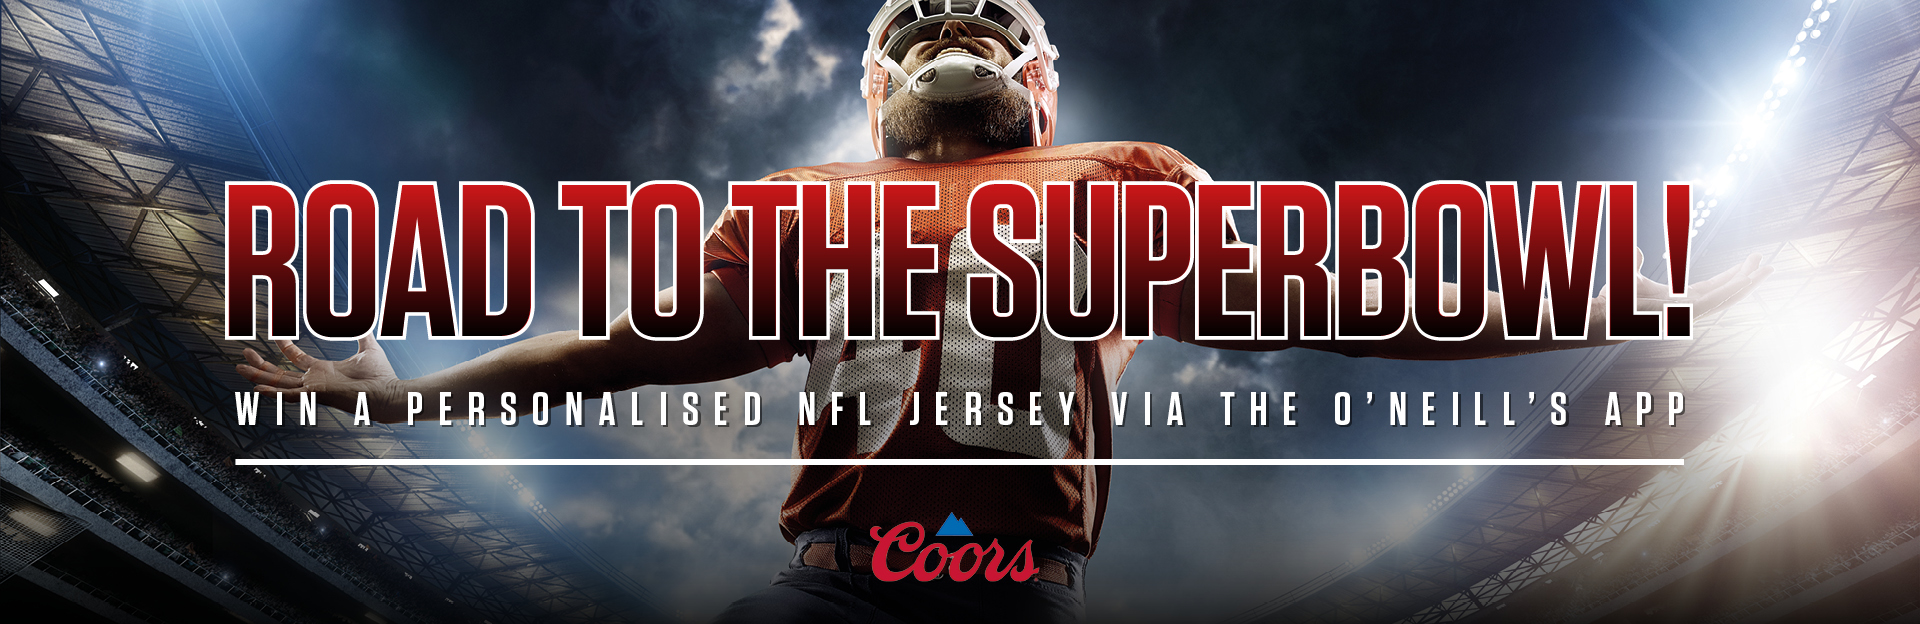 Watch NFL at The Red Lion